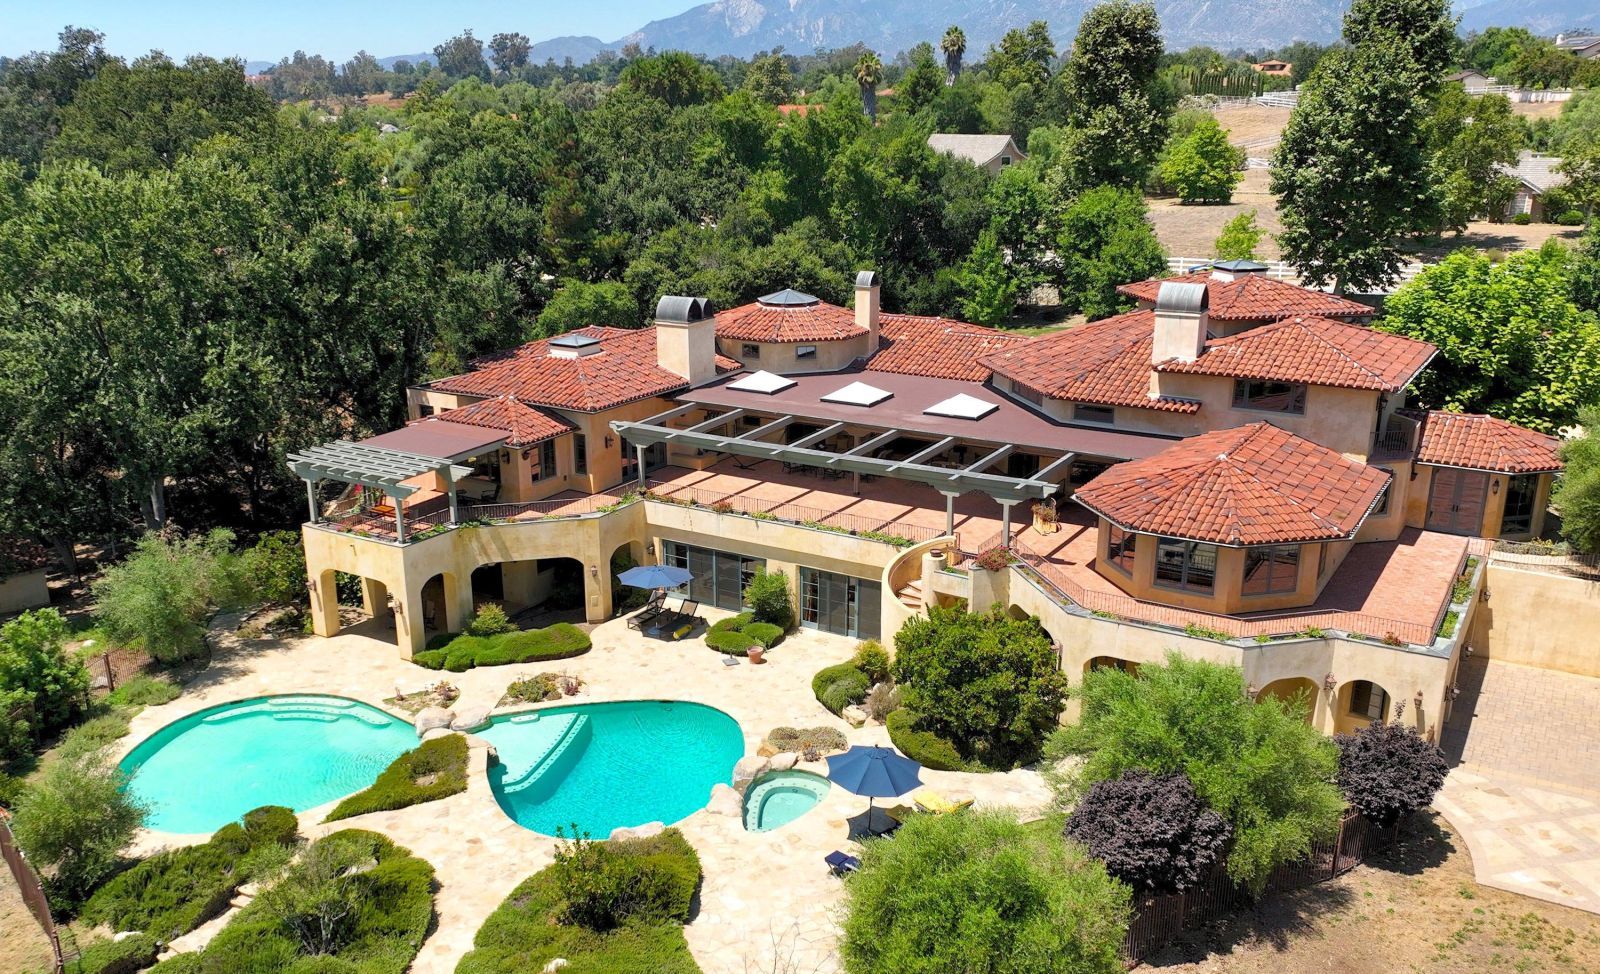 A drone view of an Ojai estate's large Mediterranean-style home, 2 pools, and grounds